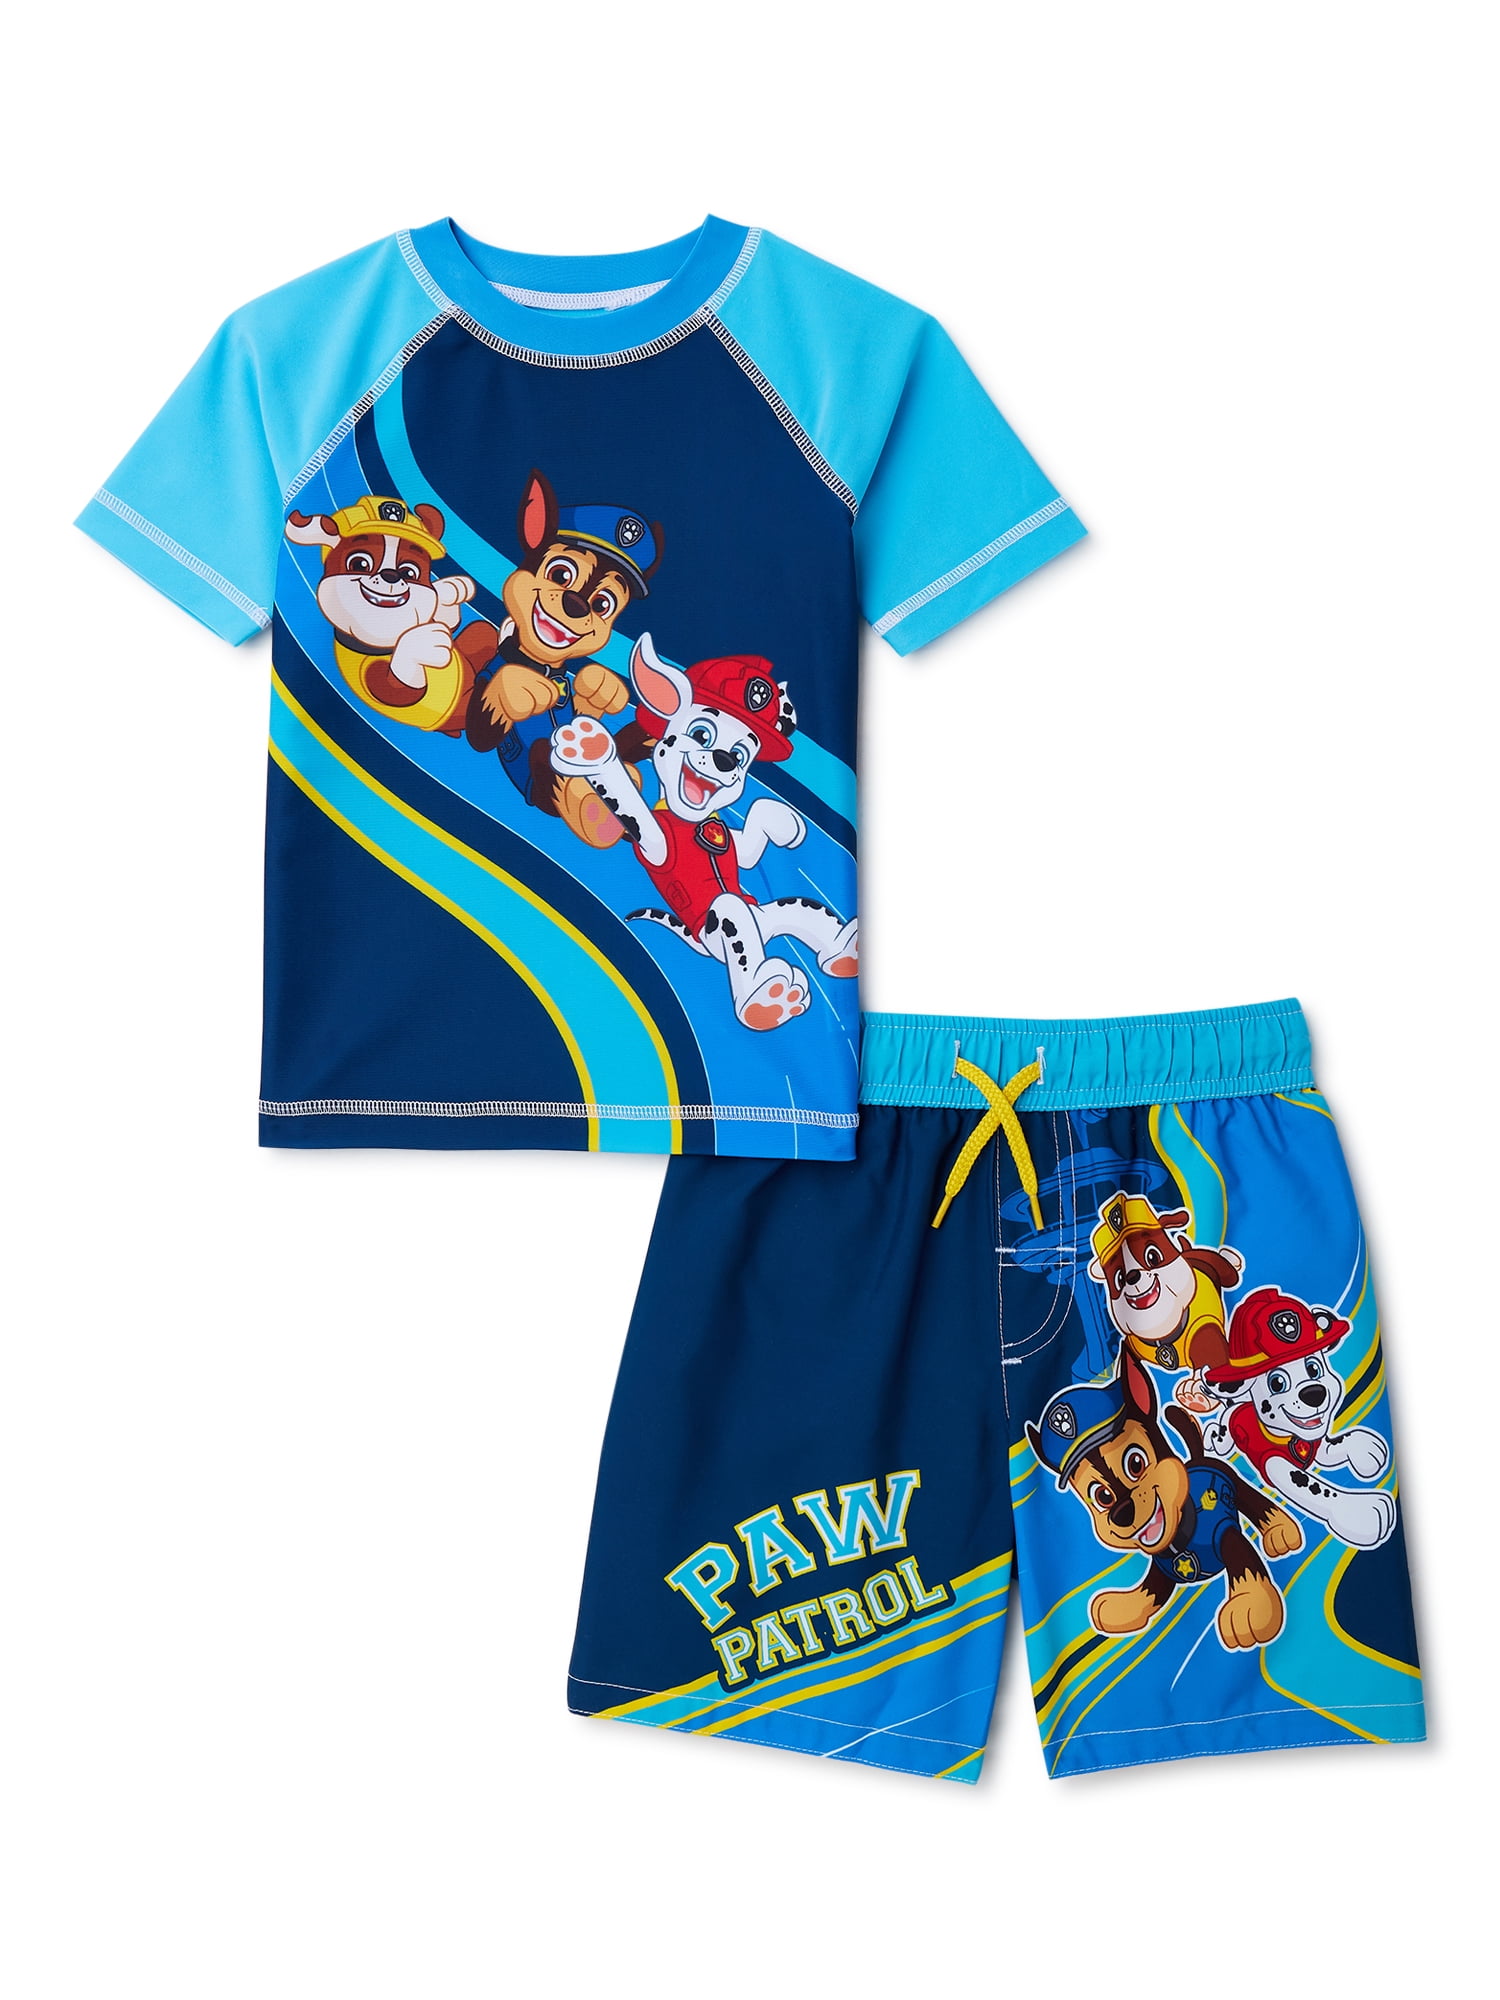 Paw Pa-Trol Boys Swim Trunks Beach Shorts Board Shorts with Pockets for 7-20 Years 